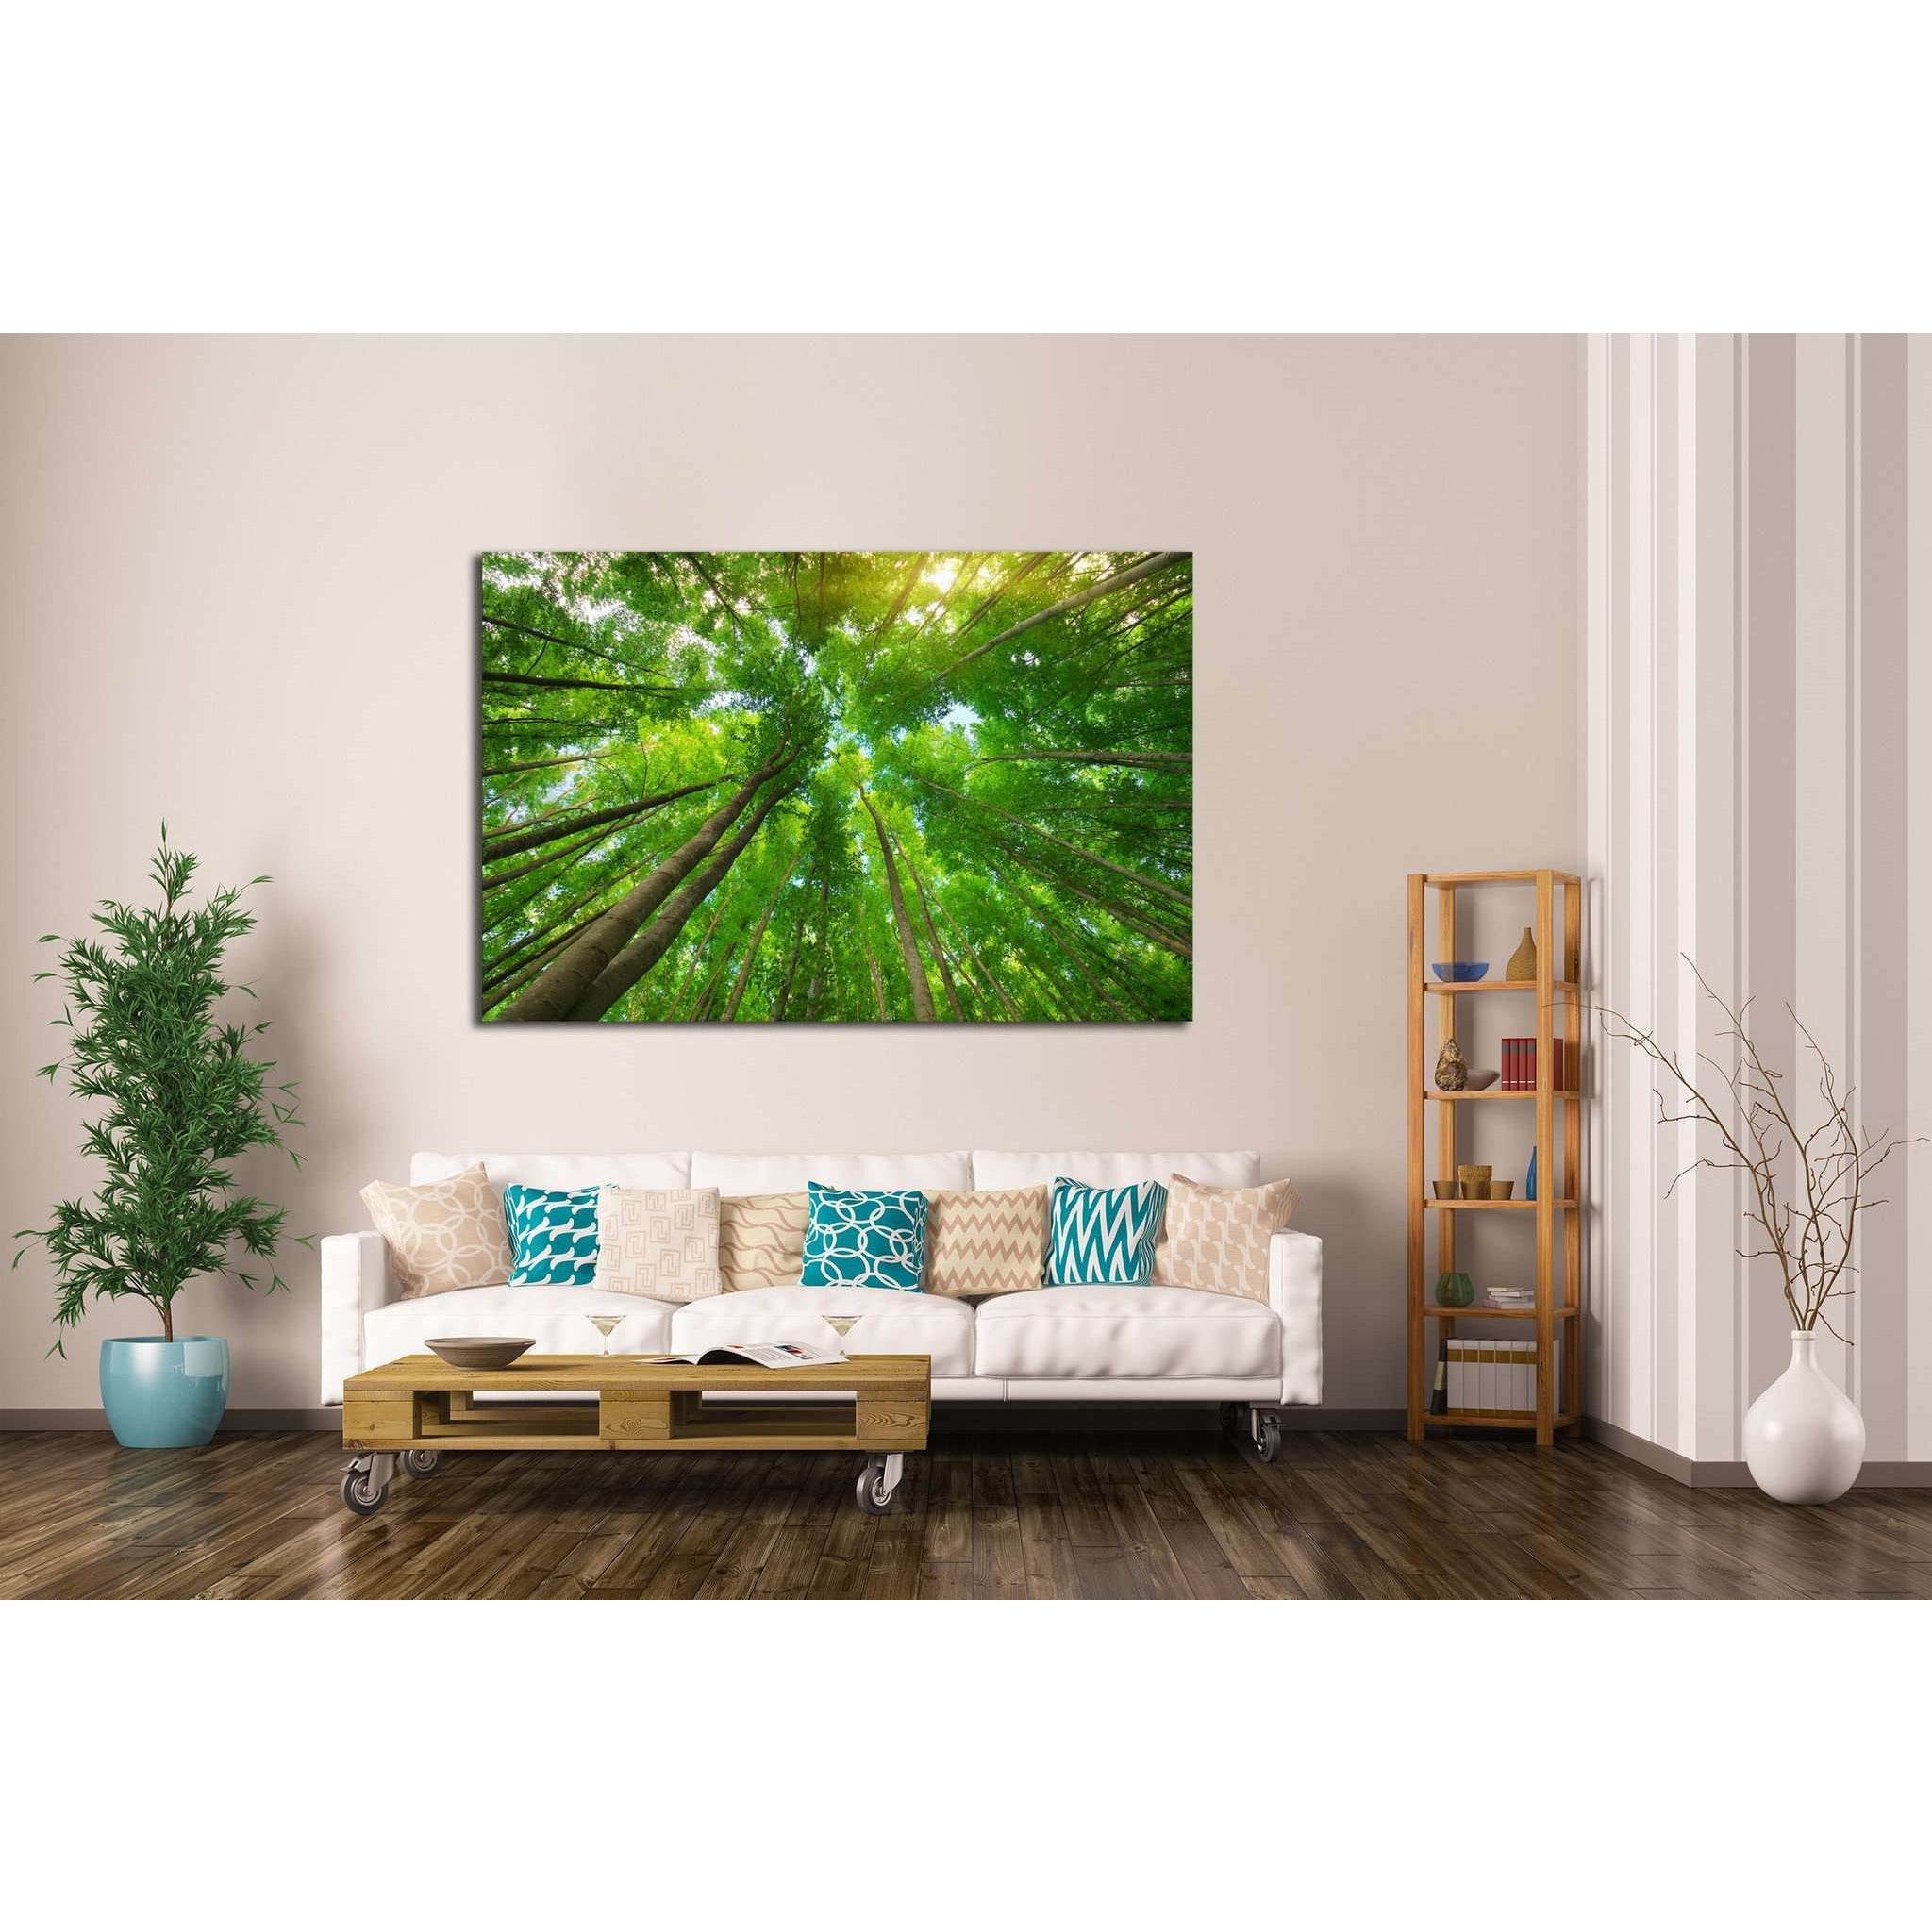 Into the forest №620 Ready to Hang Canvas Print